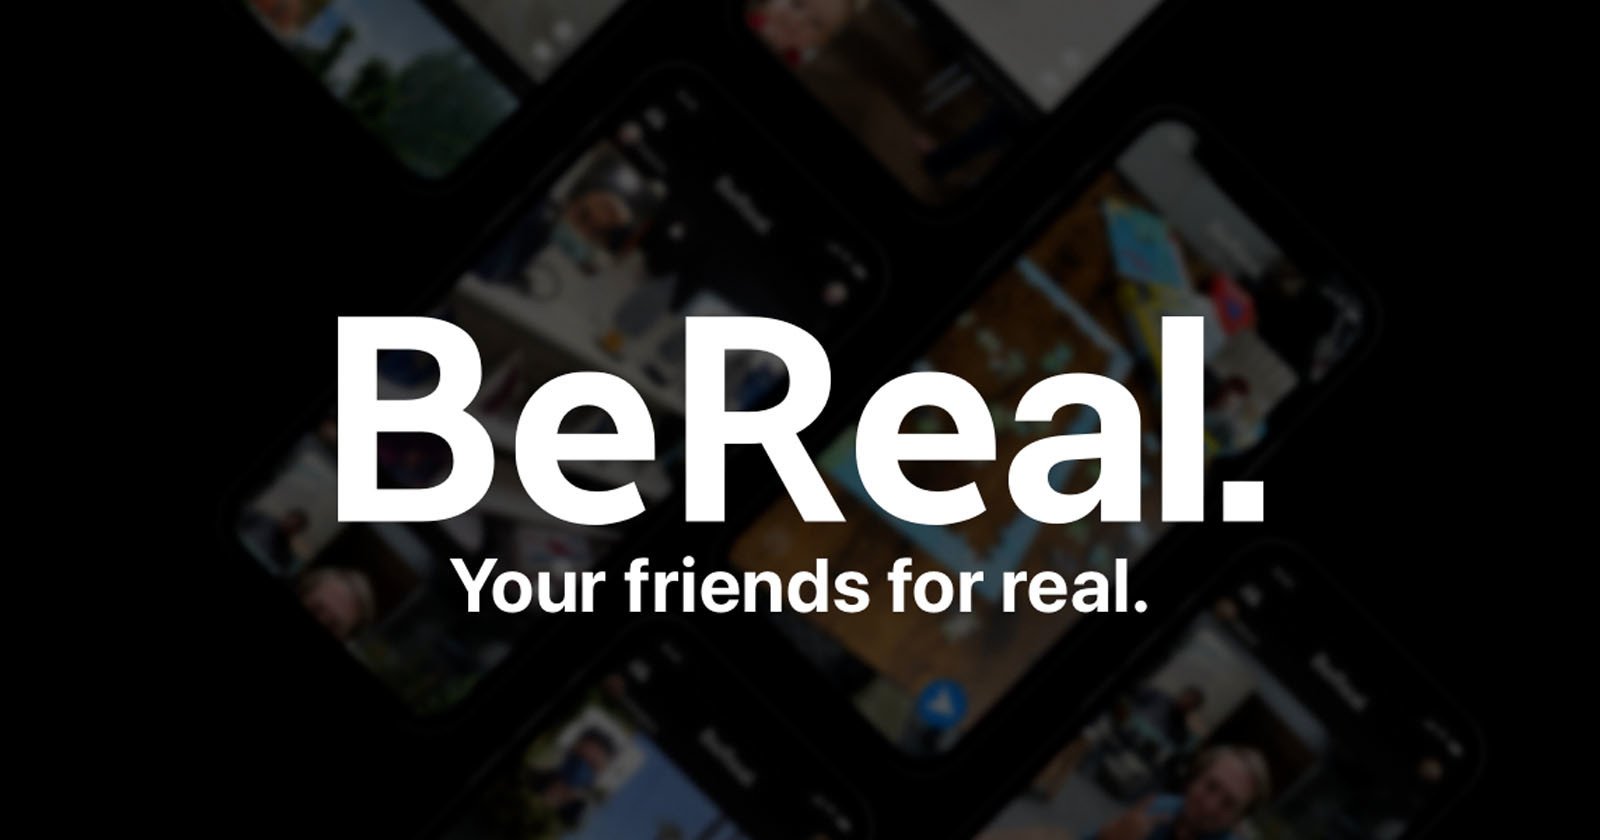  bereal may out users have nearly halved 